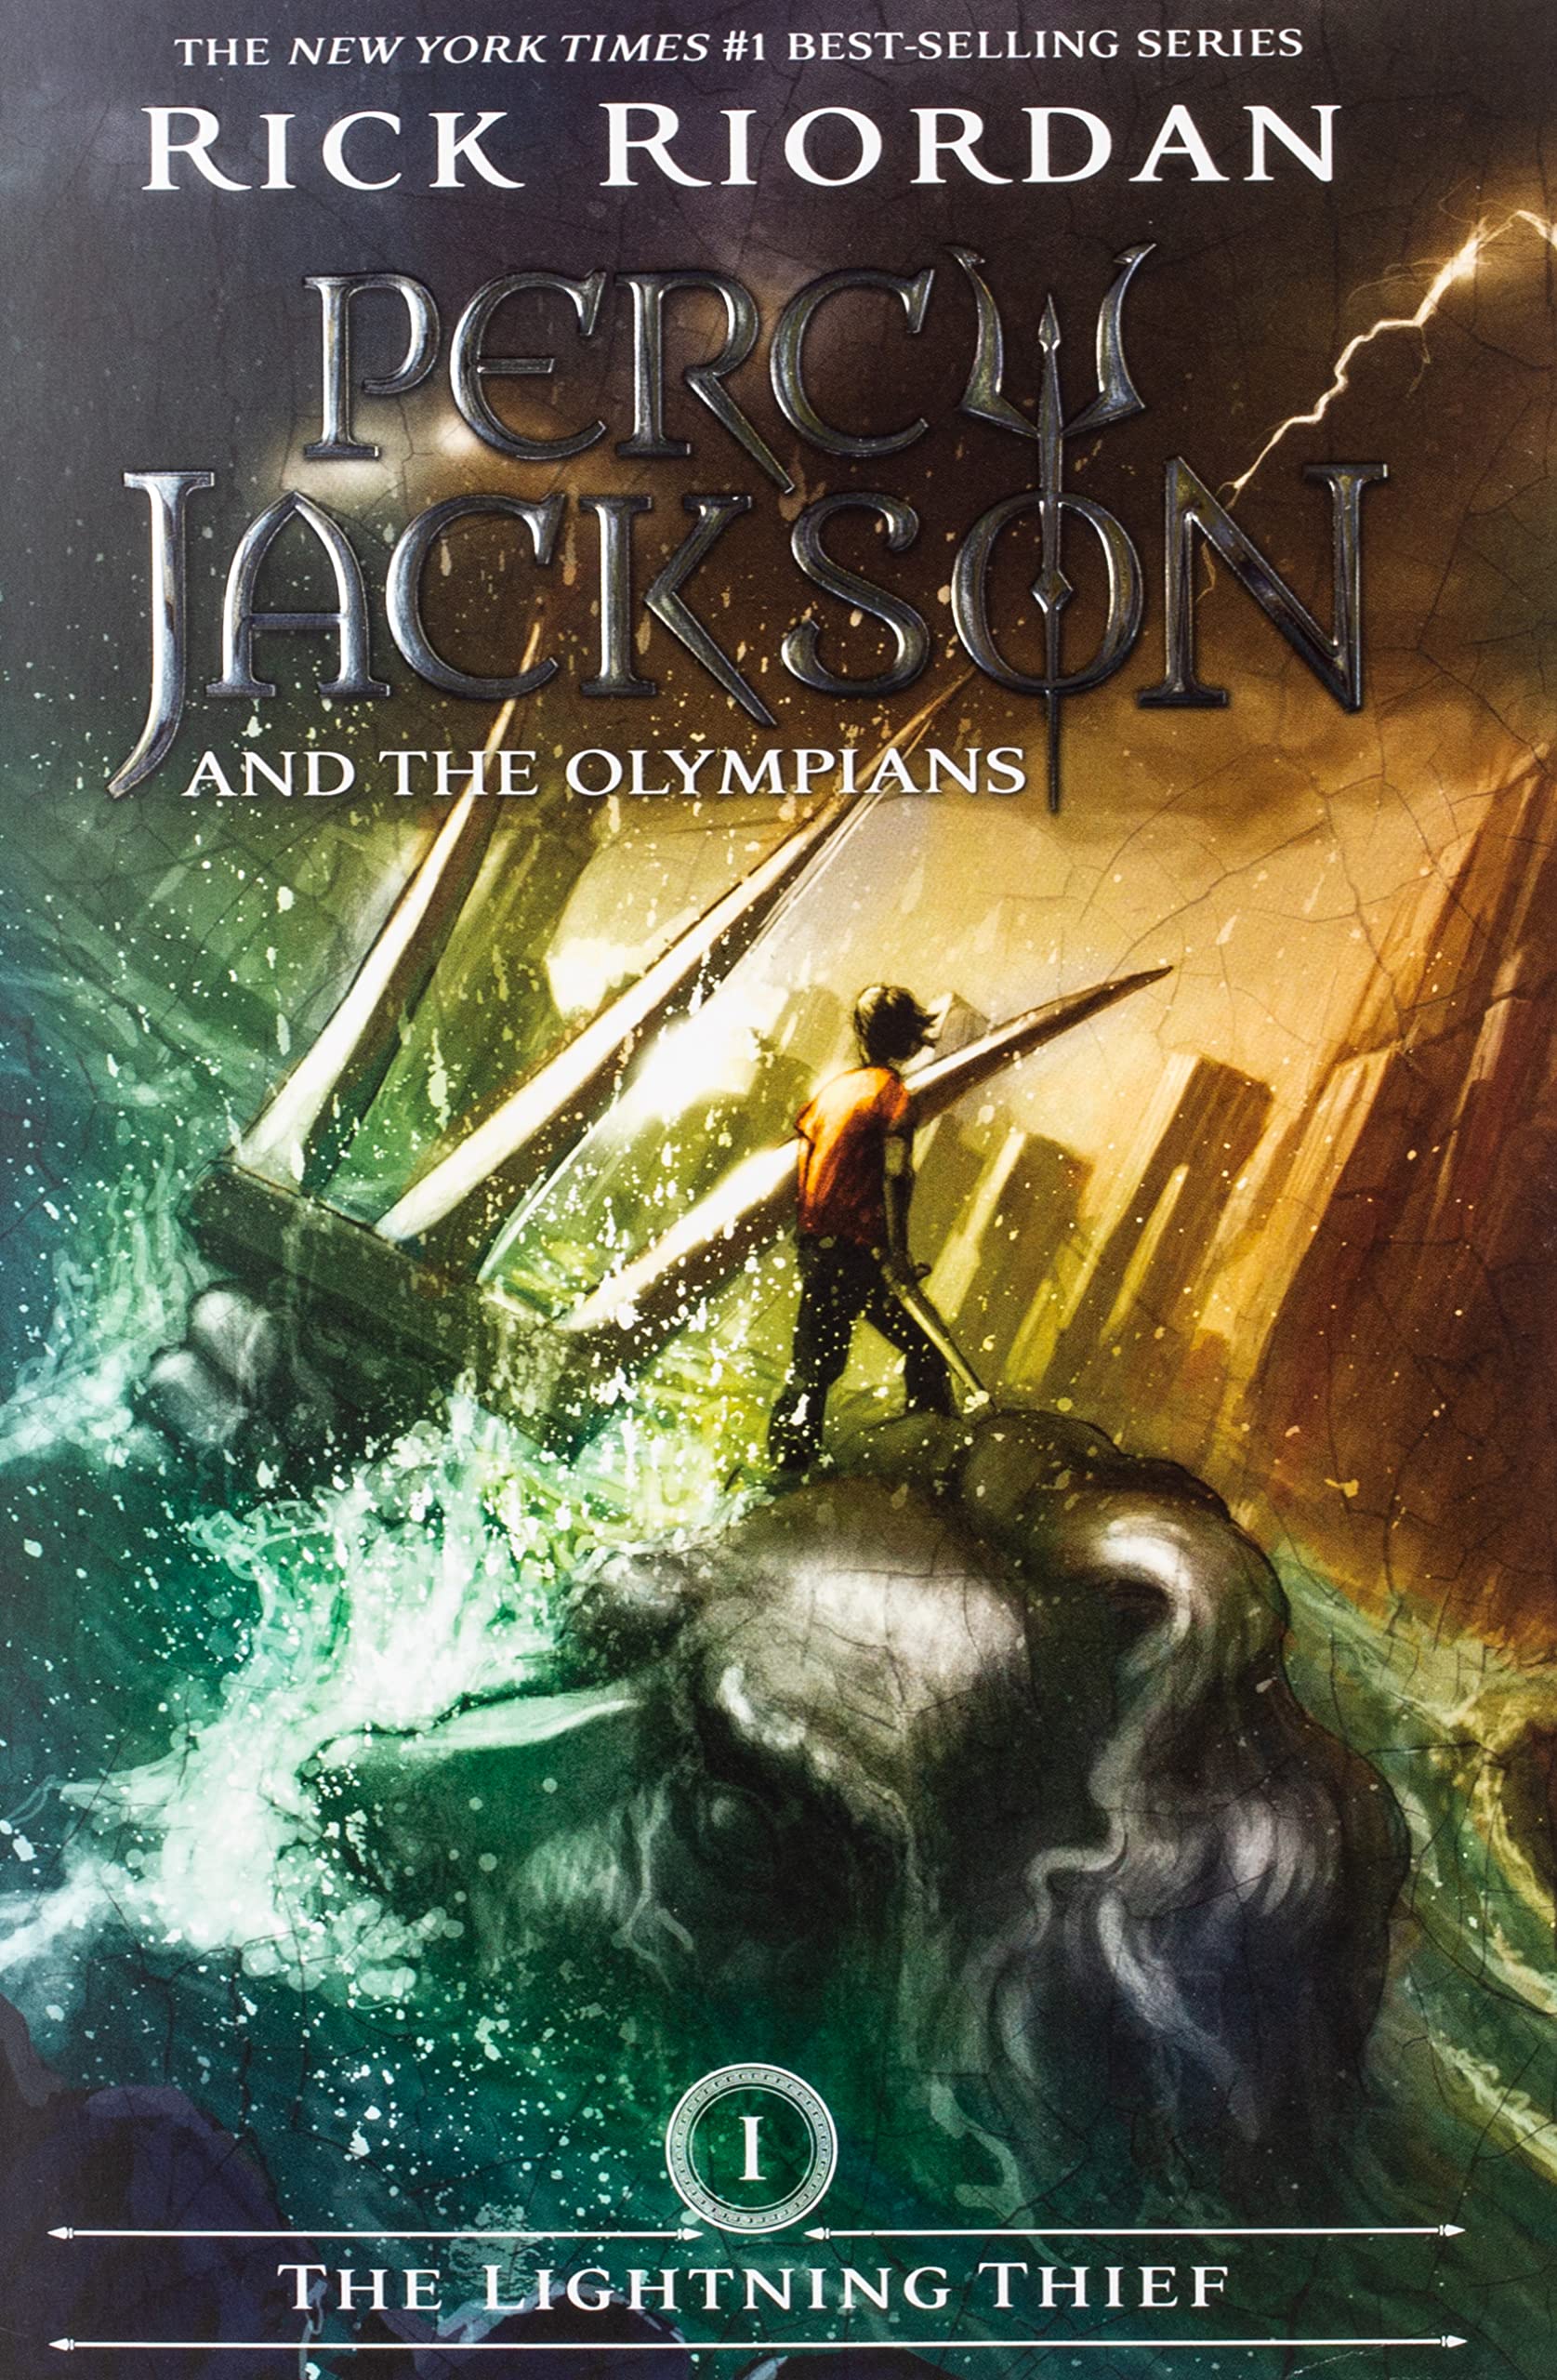 Percy Jackson & The Olympians: The Lightning Thief Wallpapers